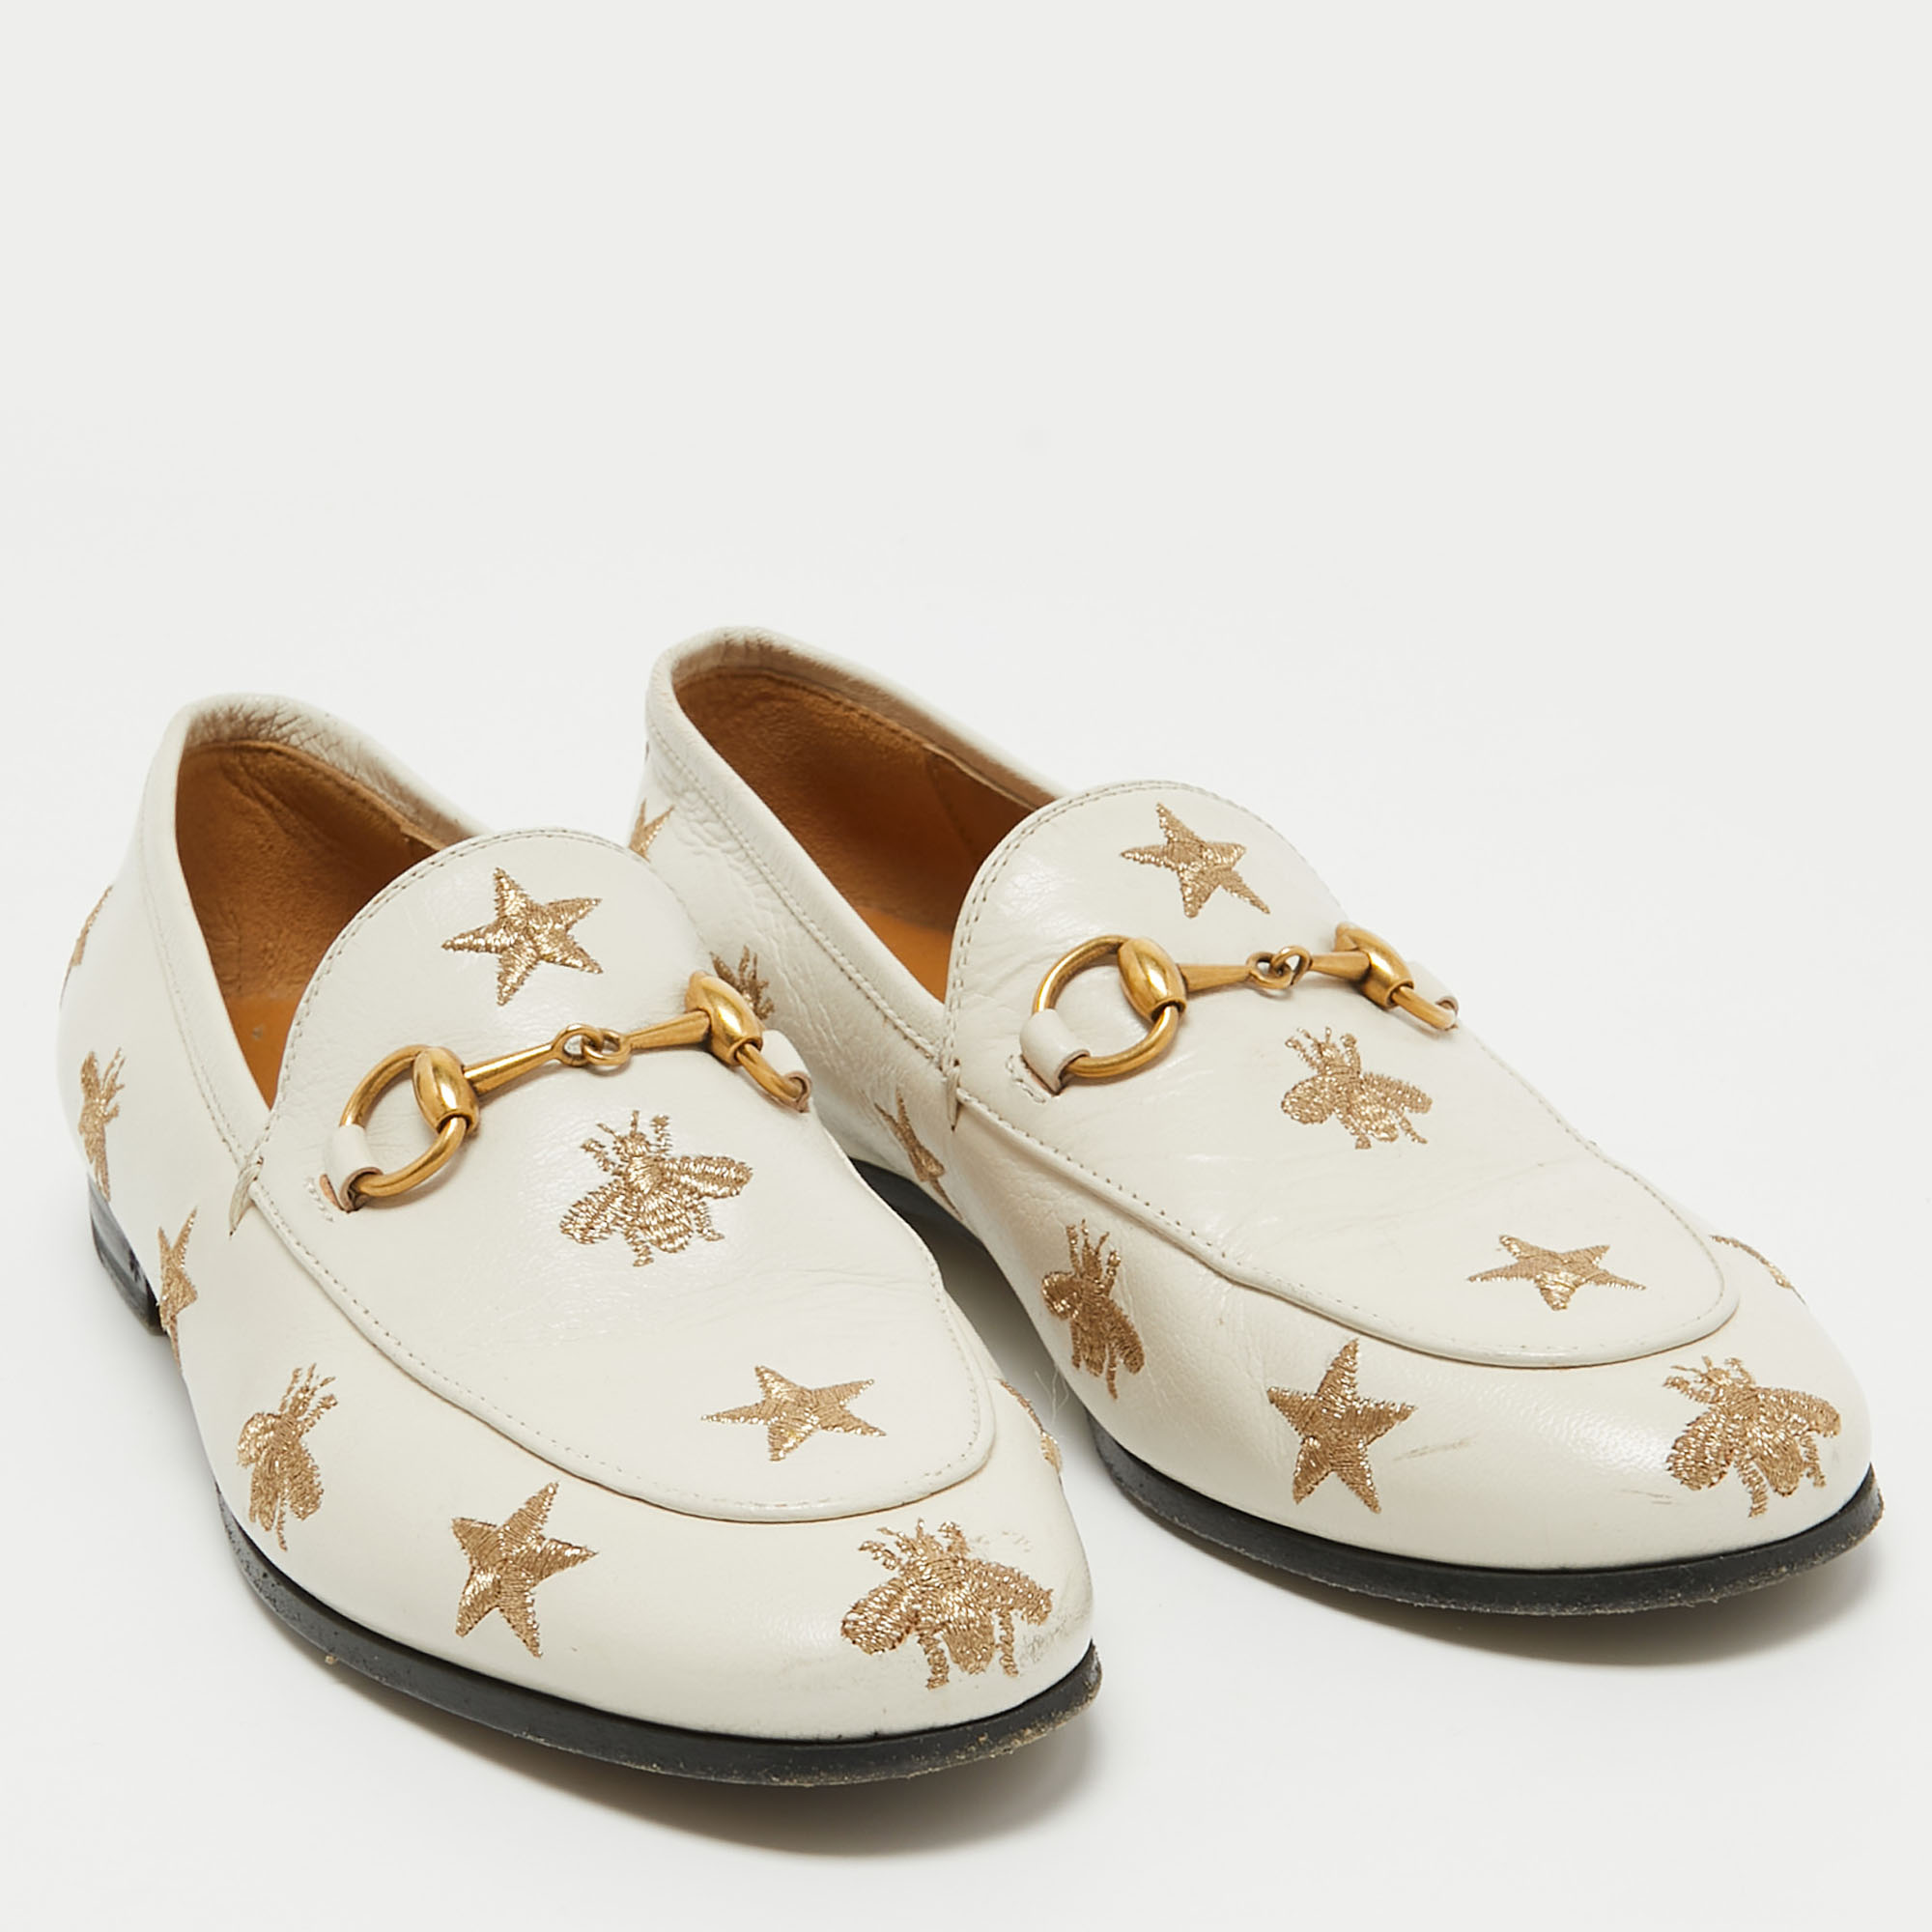 Gucci Cream Leather Jordaan Embroidered Bee Horsebit Slip On Loafers Size 35